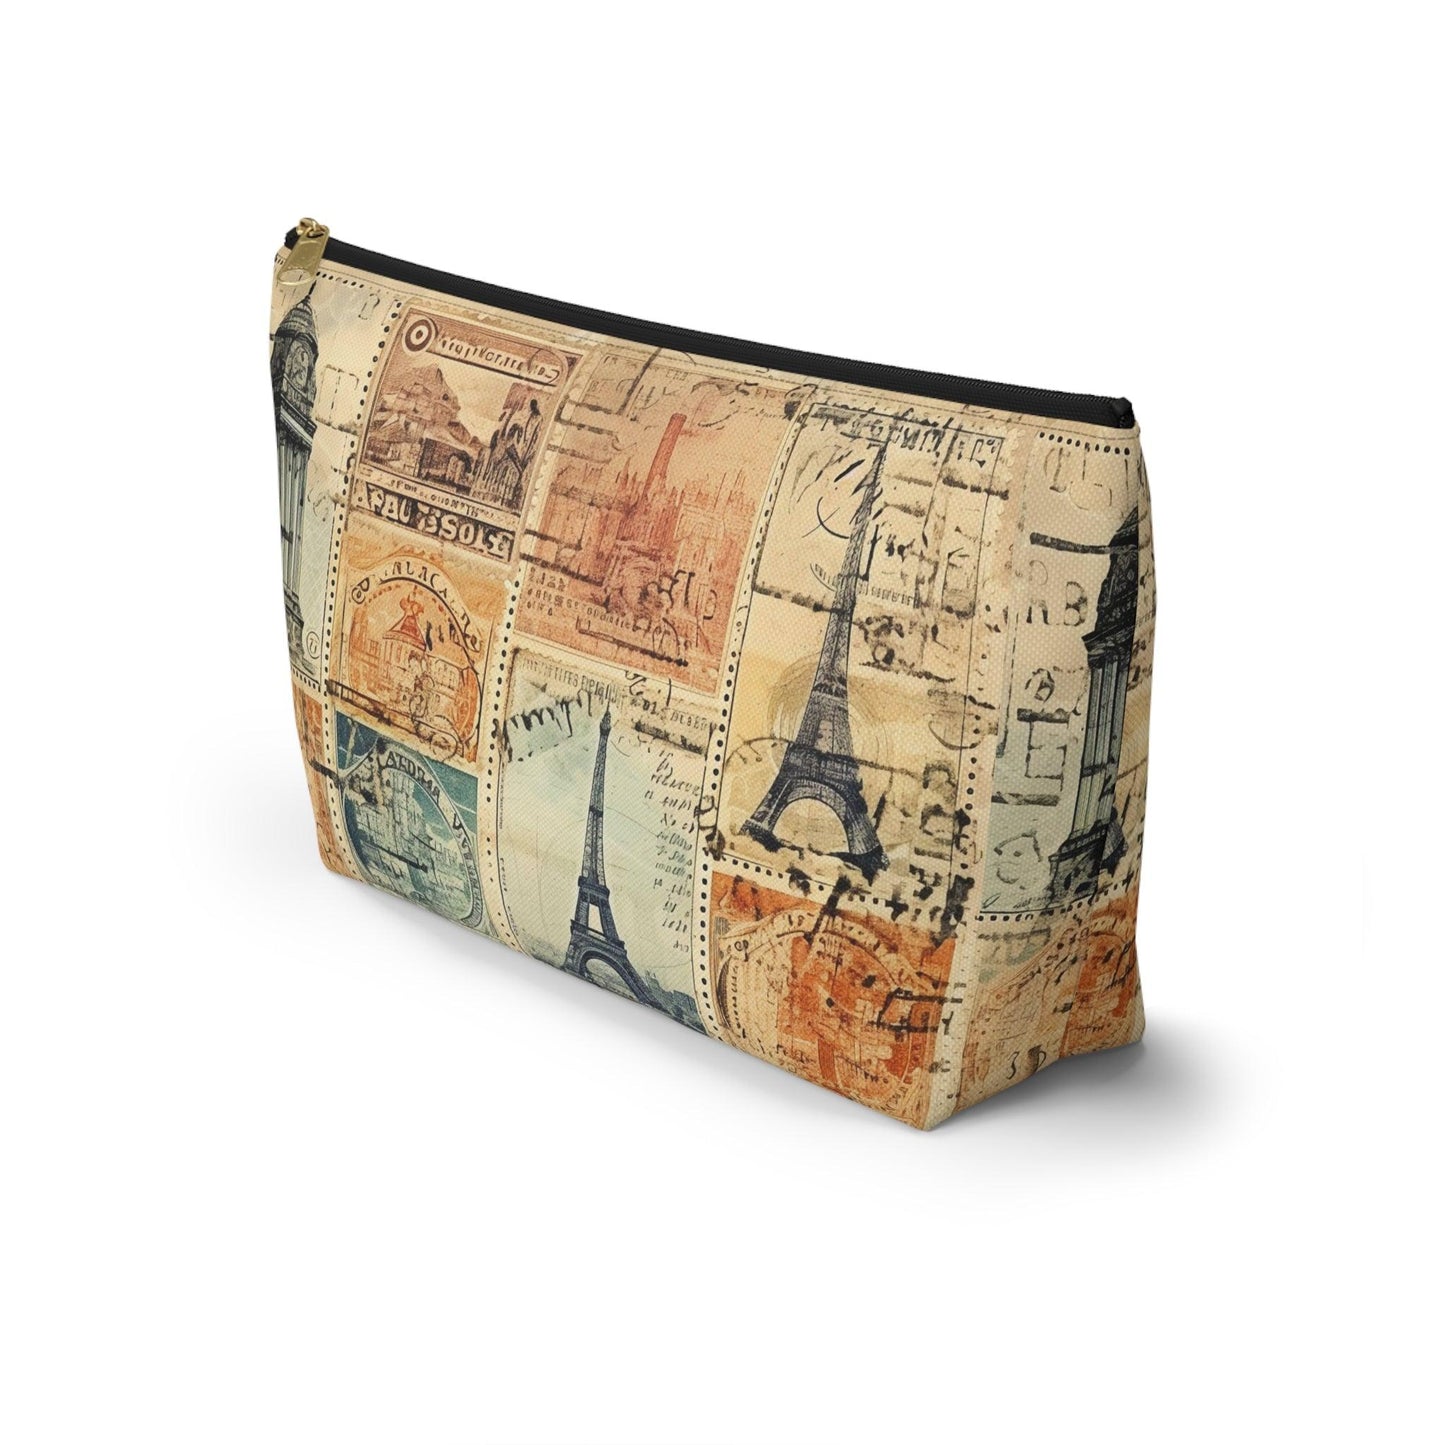 Vintage Travel Stamps Print Pouch - The Global Wanderer